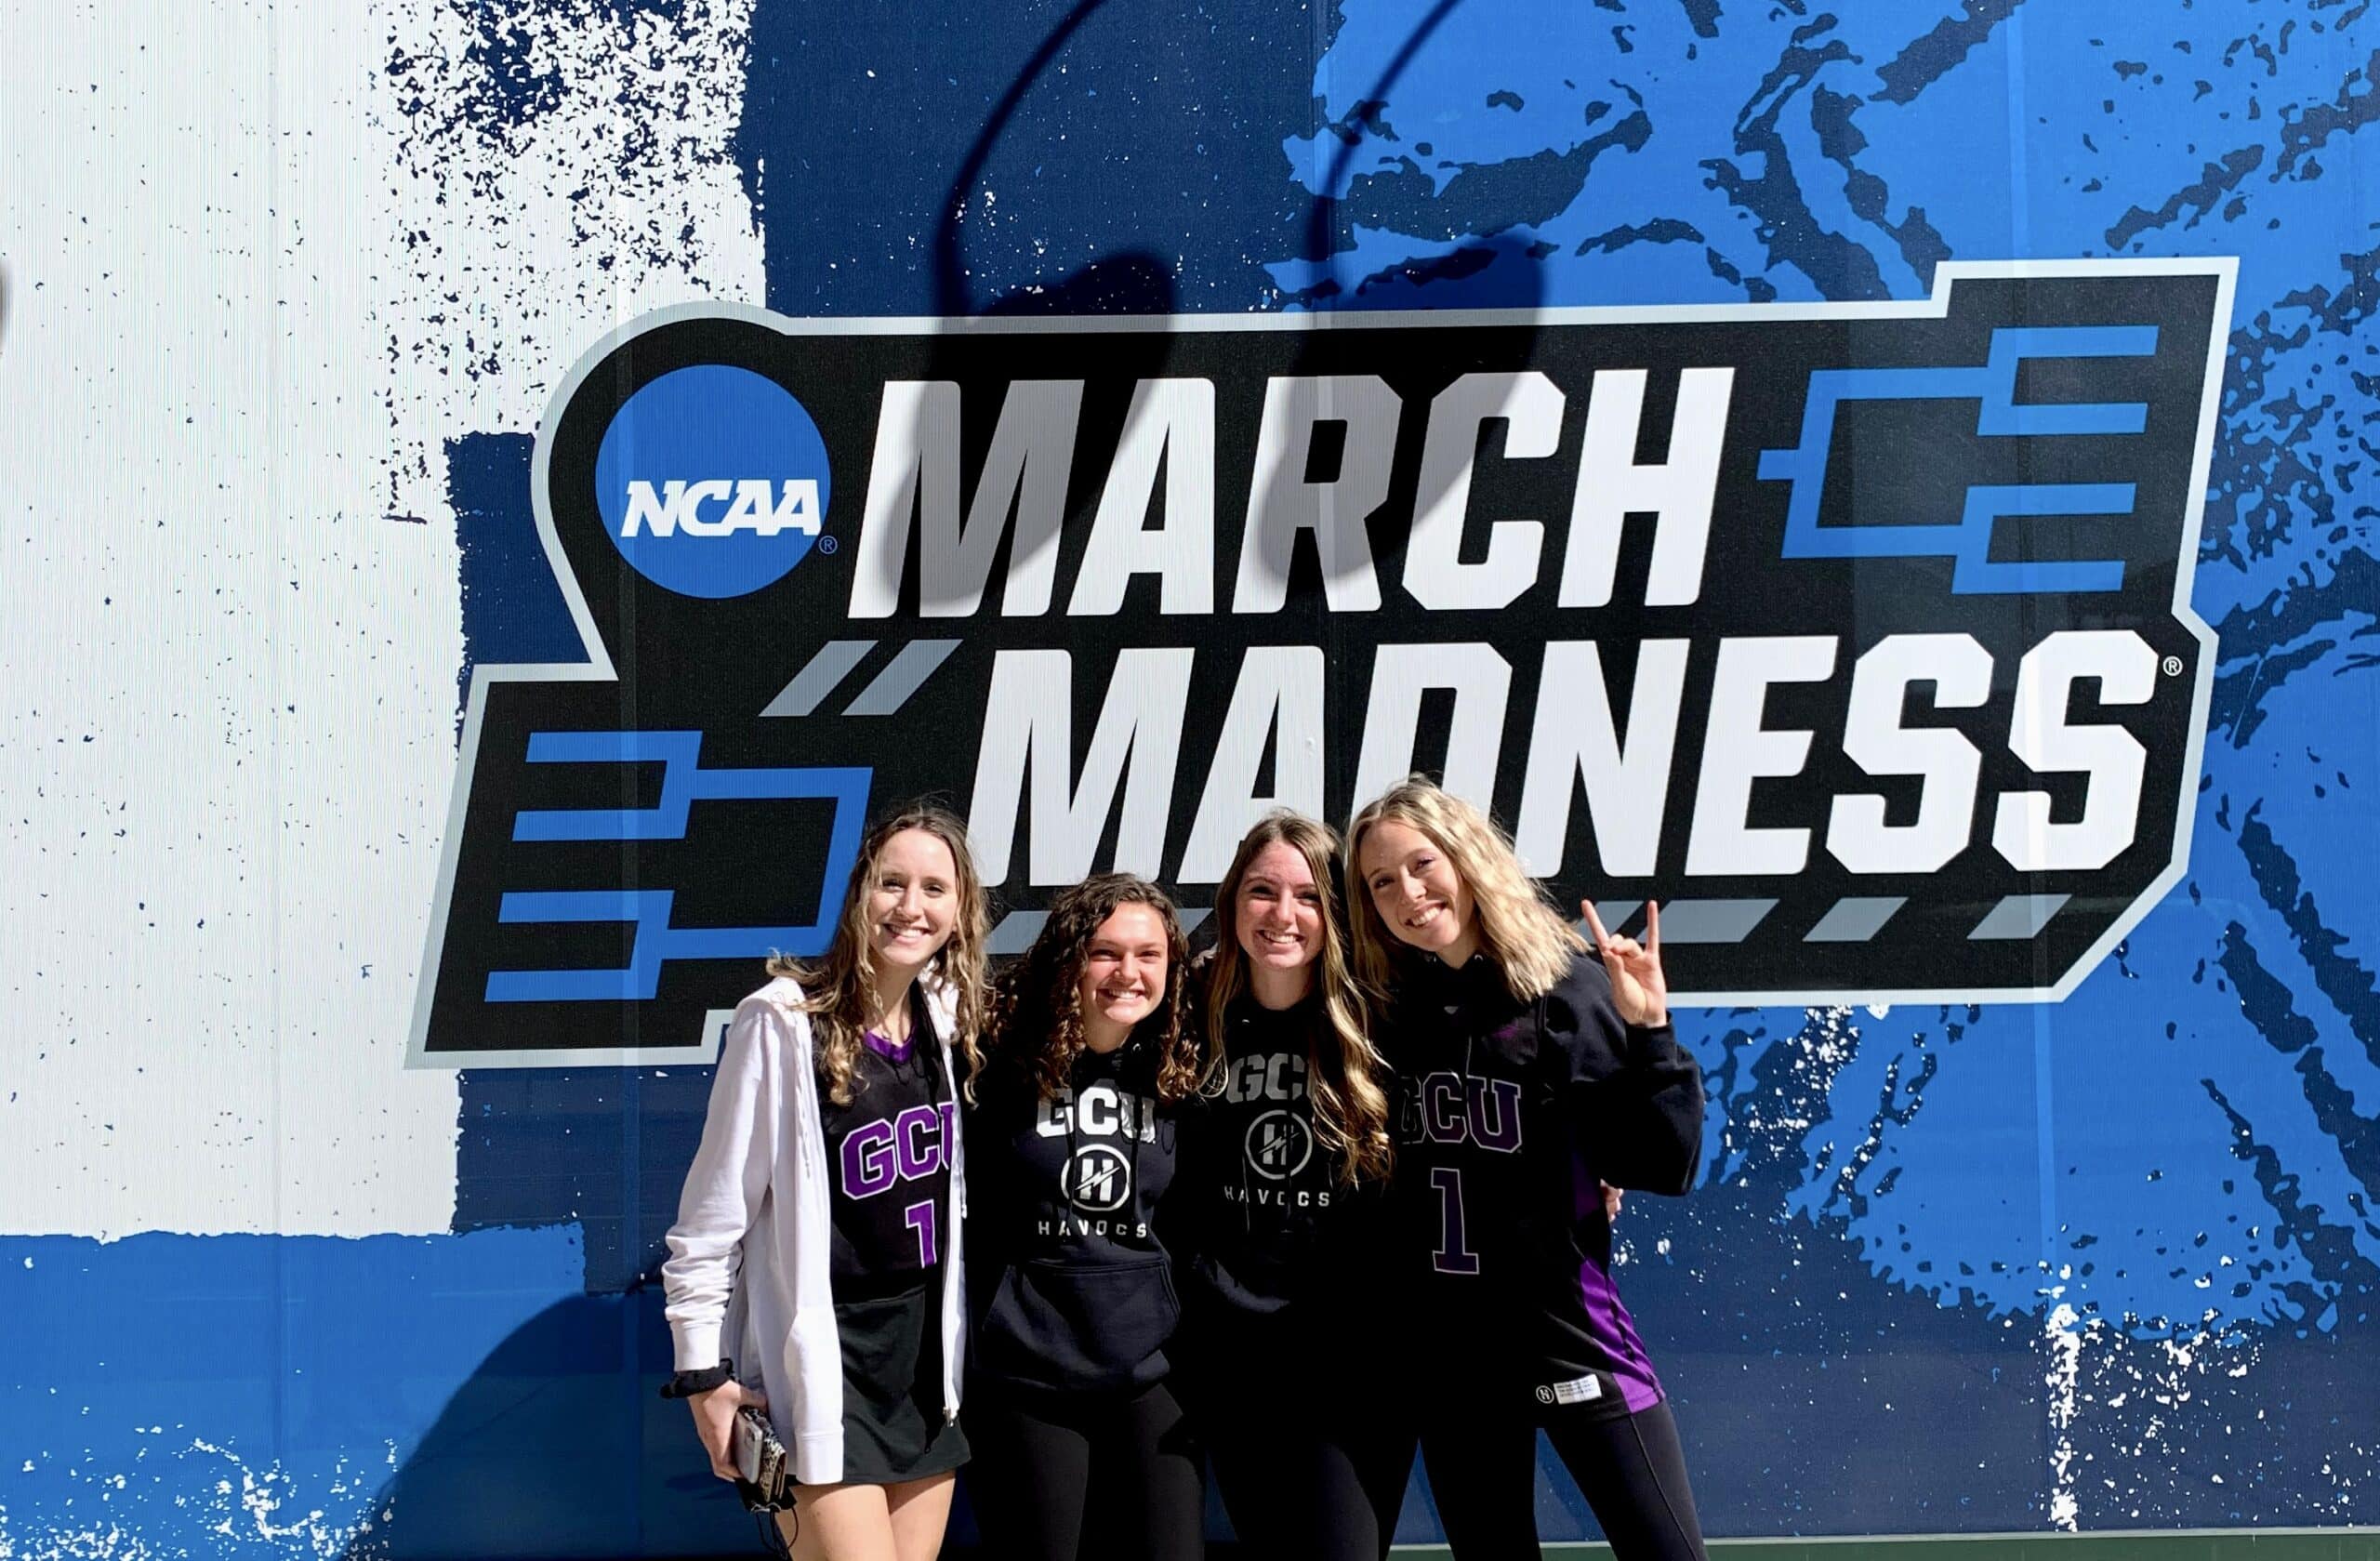 The student section leaders of Grand Canyon University stand in front of a wall that says "March Madness"